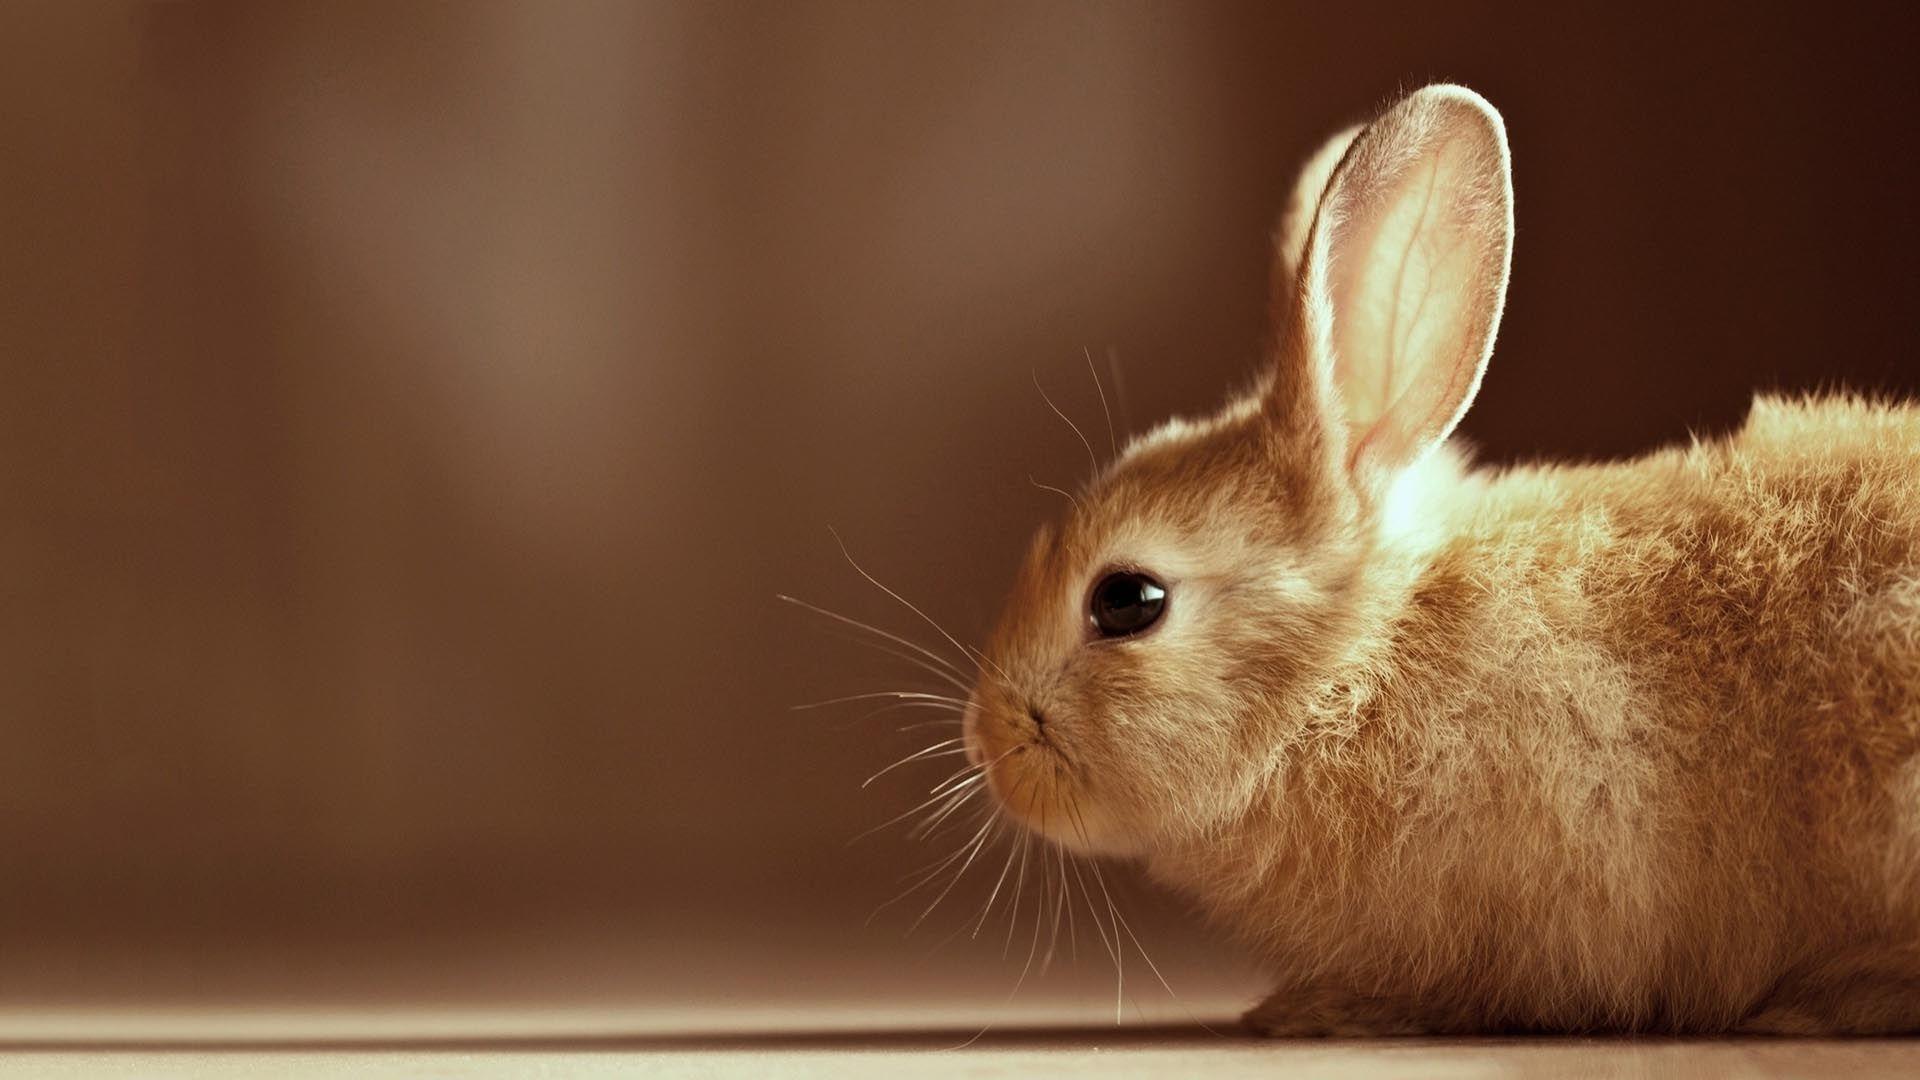 Bunny Wallpaper Find best latest Bunny Wallpaper For your PC